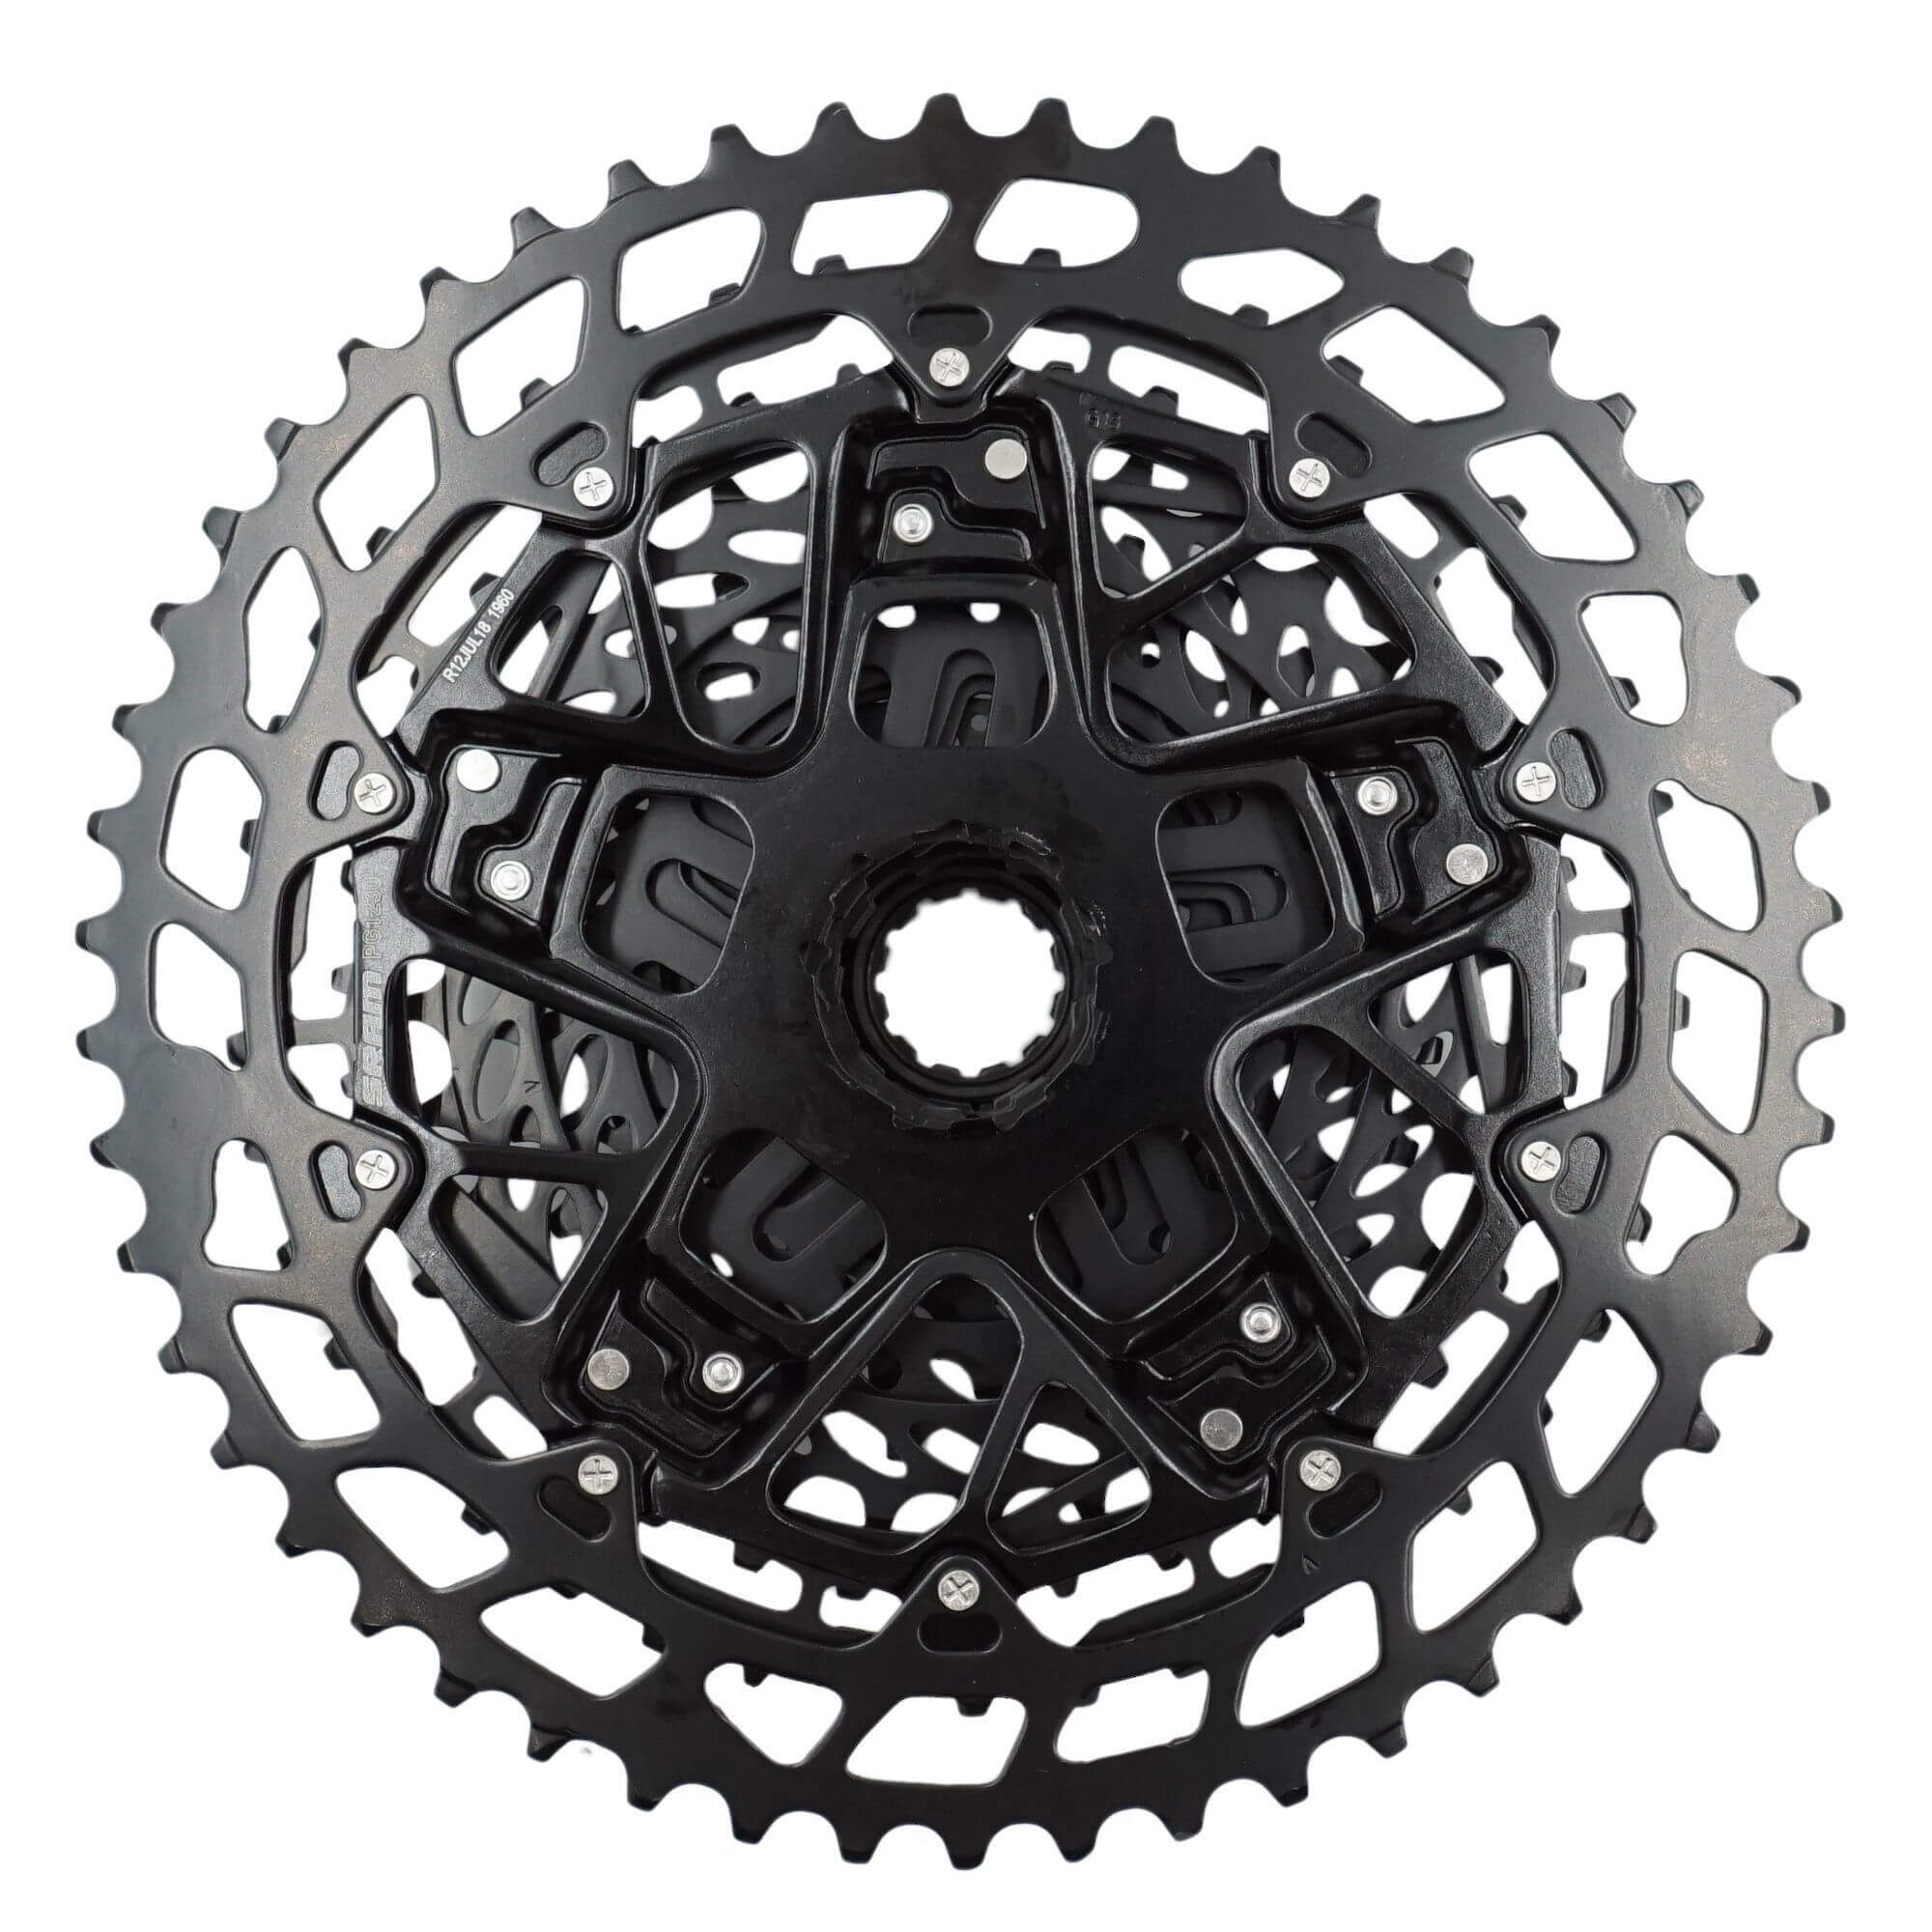 SRAM NX Eagle DUB Groupset with BOOST 175mm Crank - TheBikesmiths